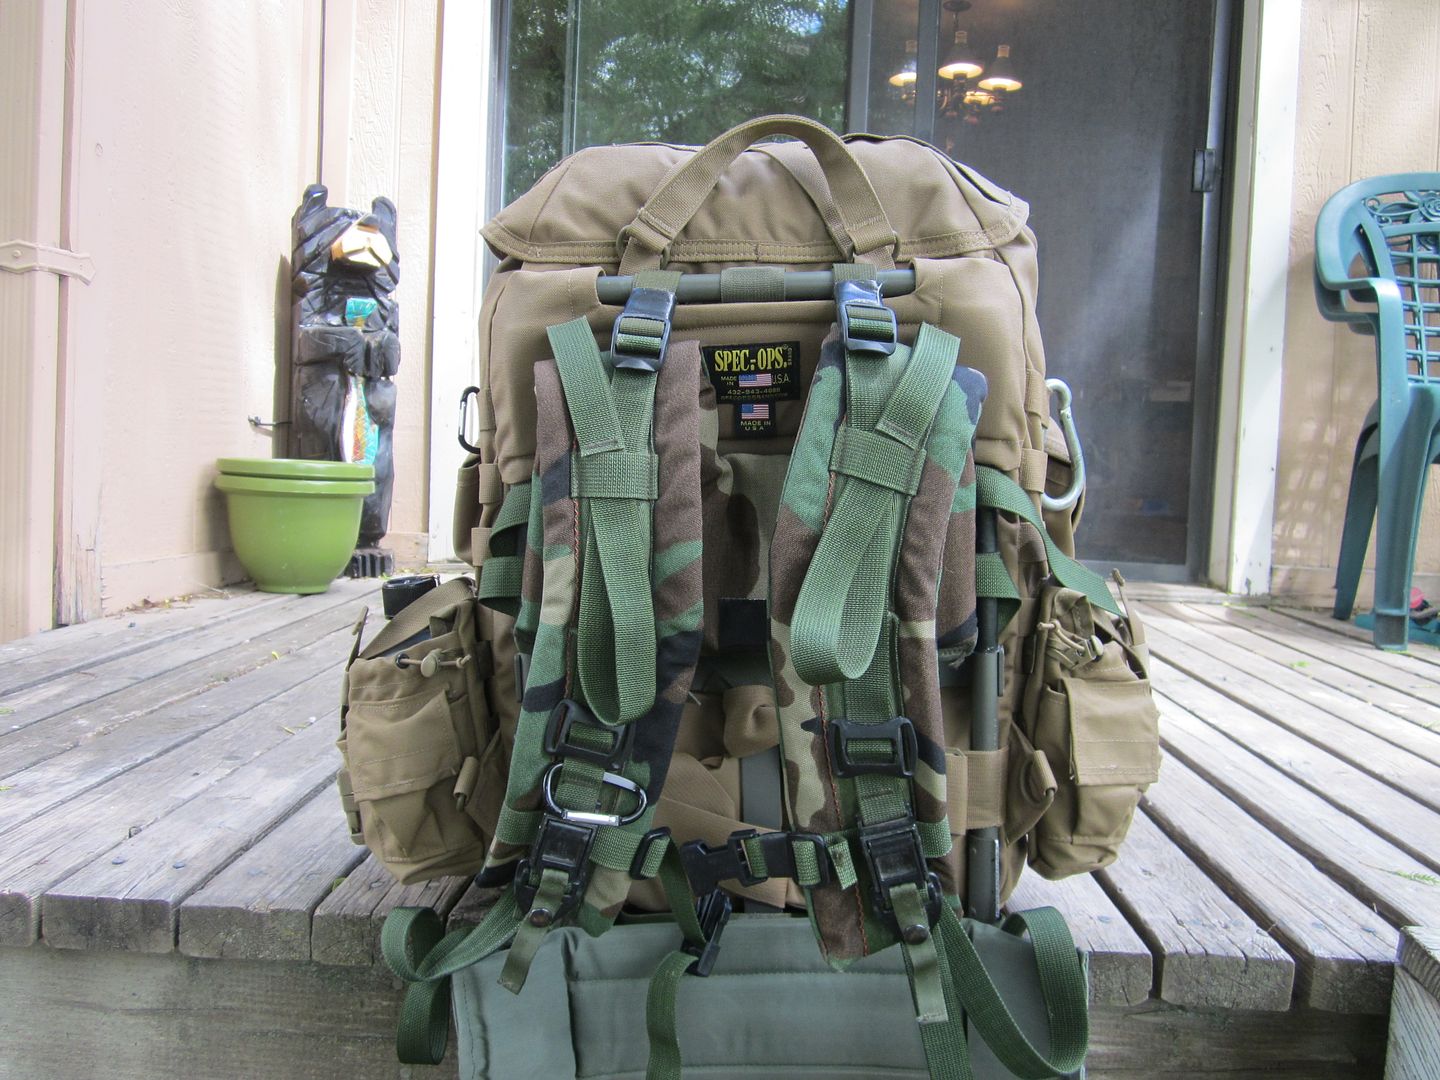 spec ops recon ruck ultra